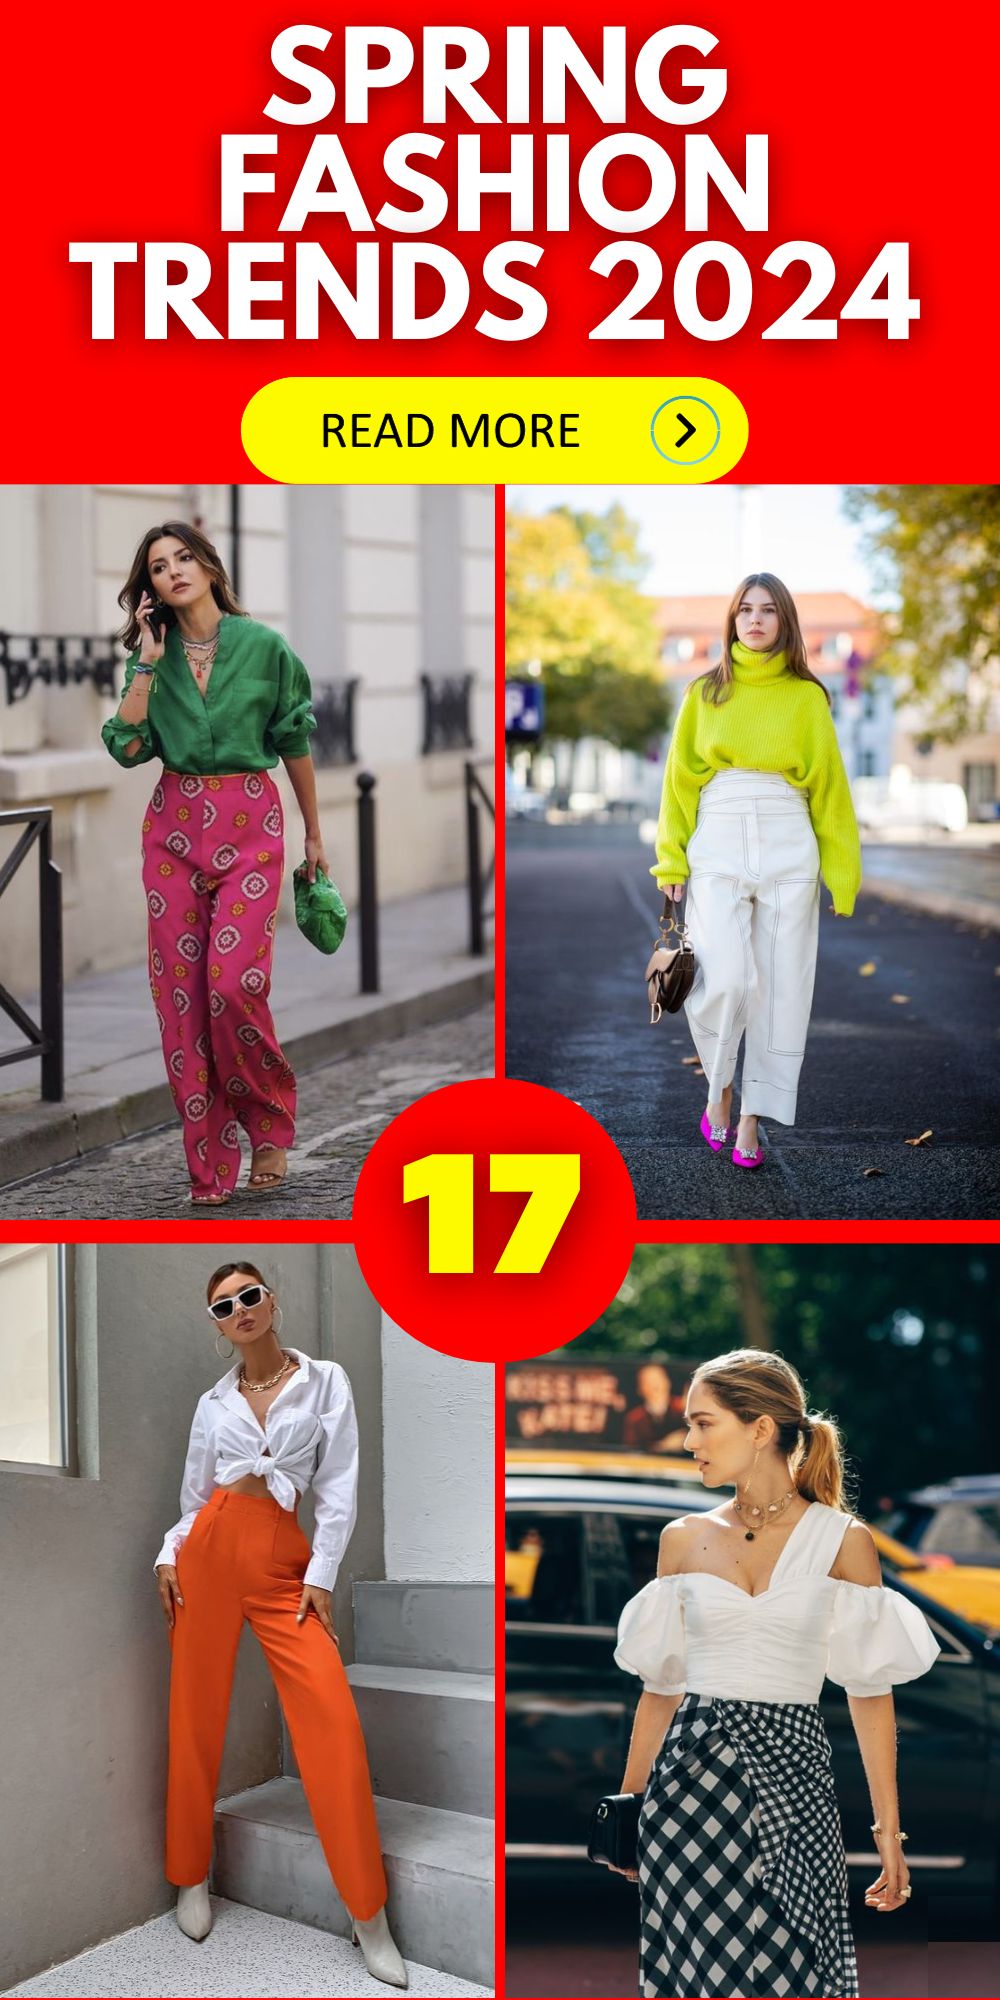 Spring Fashion Trends 2024 - Colorful & Chic Street Styles for Women